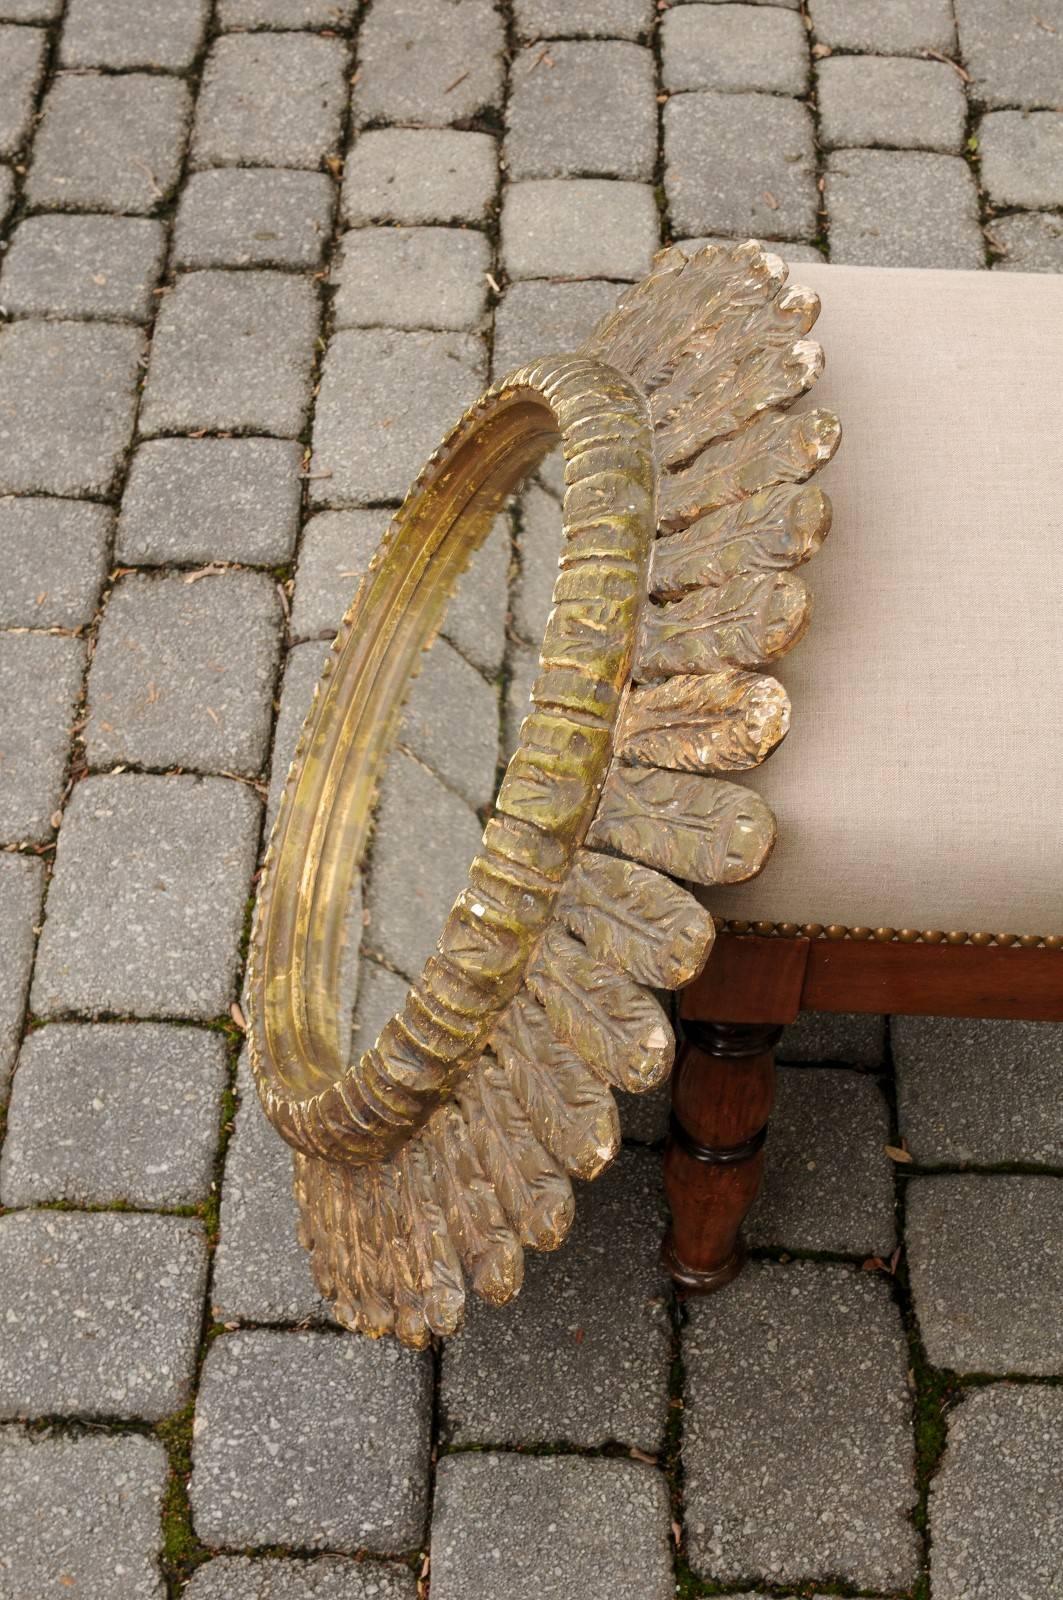 Mid-Century Modern Italian Carved Giltwood Circular Mirror with Foliage Motifs from the 1950s